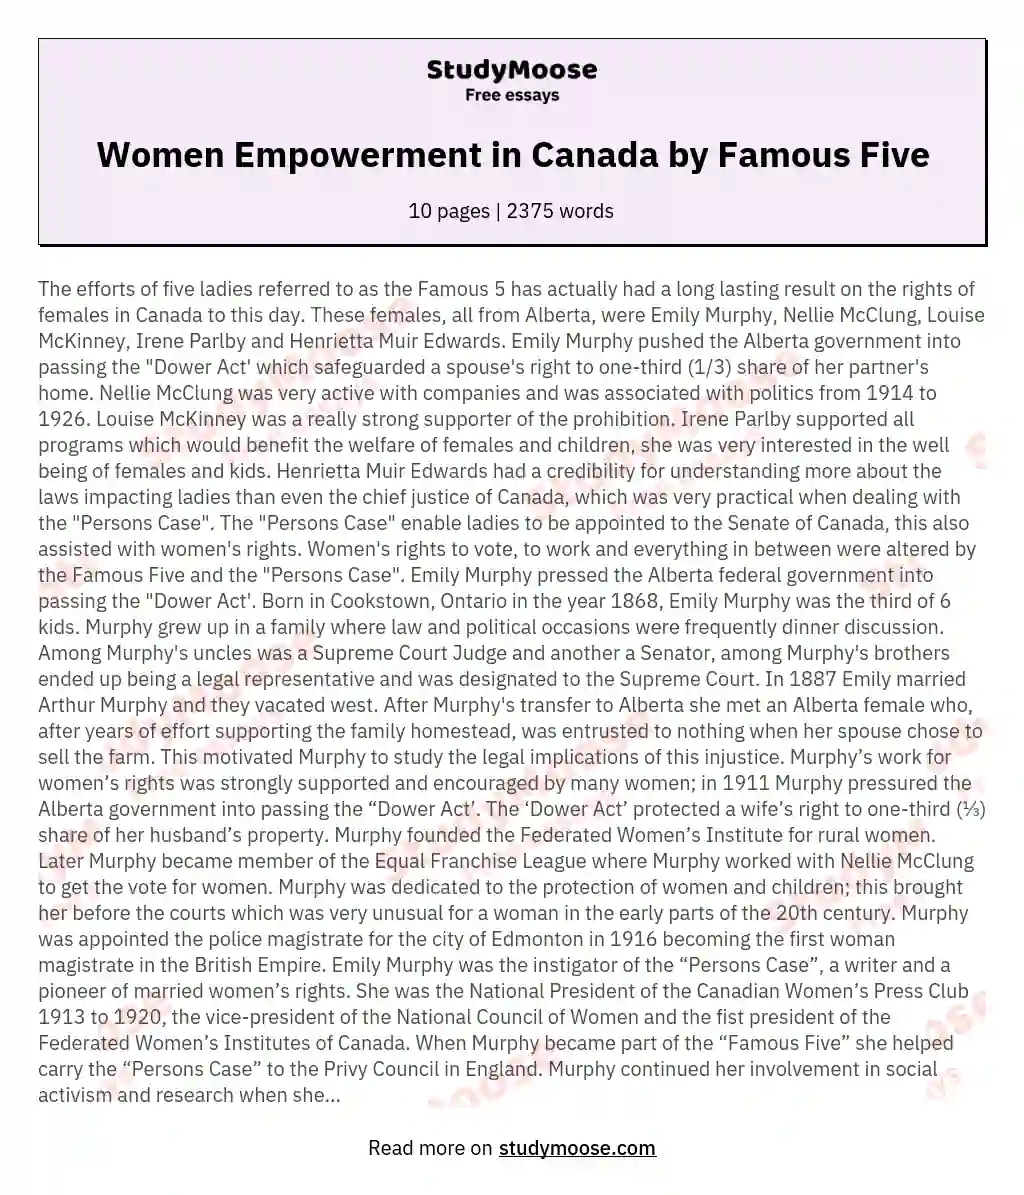 Women Empowerment in Canada by Famous Five